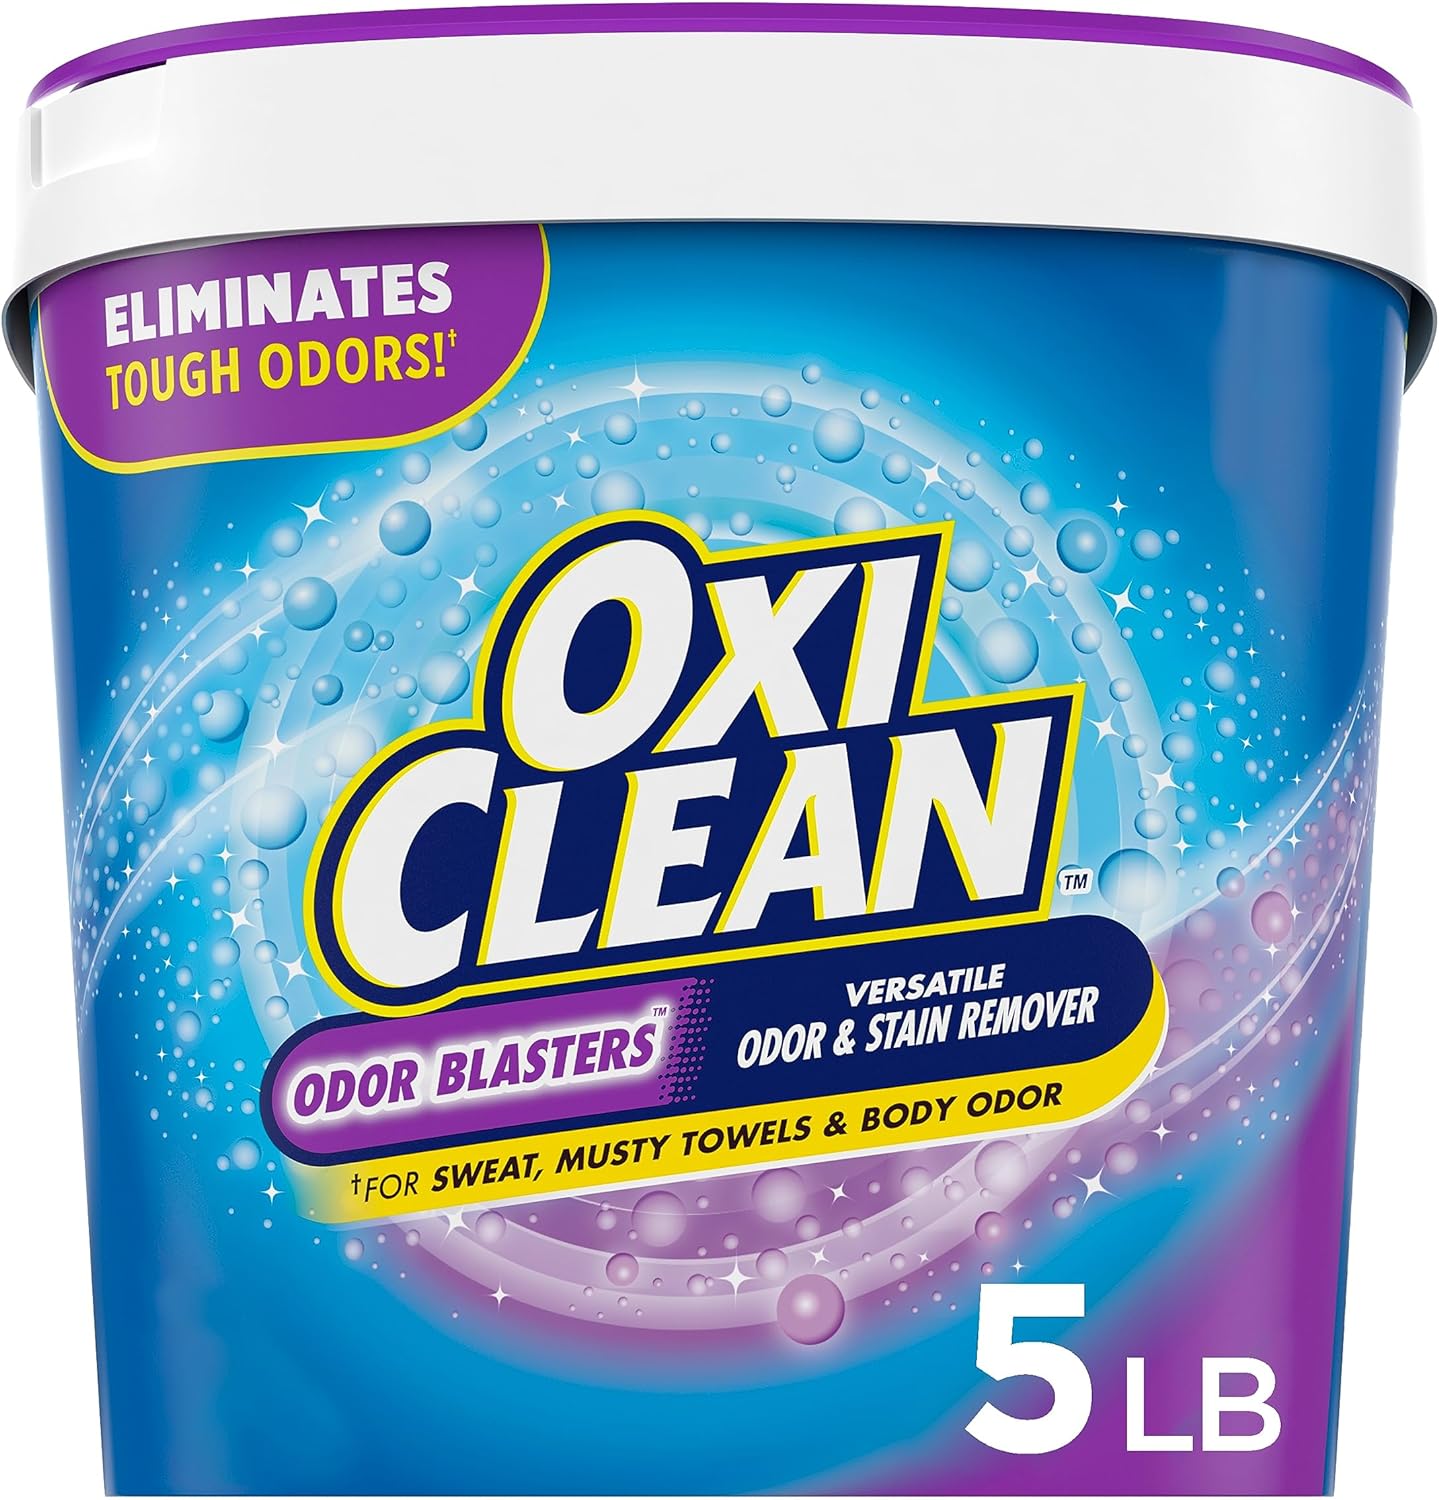 5-lbs OxiClean Odor Blasters Odor & Stain Remover Laundry Powder $8.24 w/ S&S + Free Shipping w/ Prime or $35+